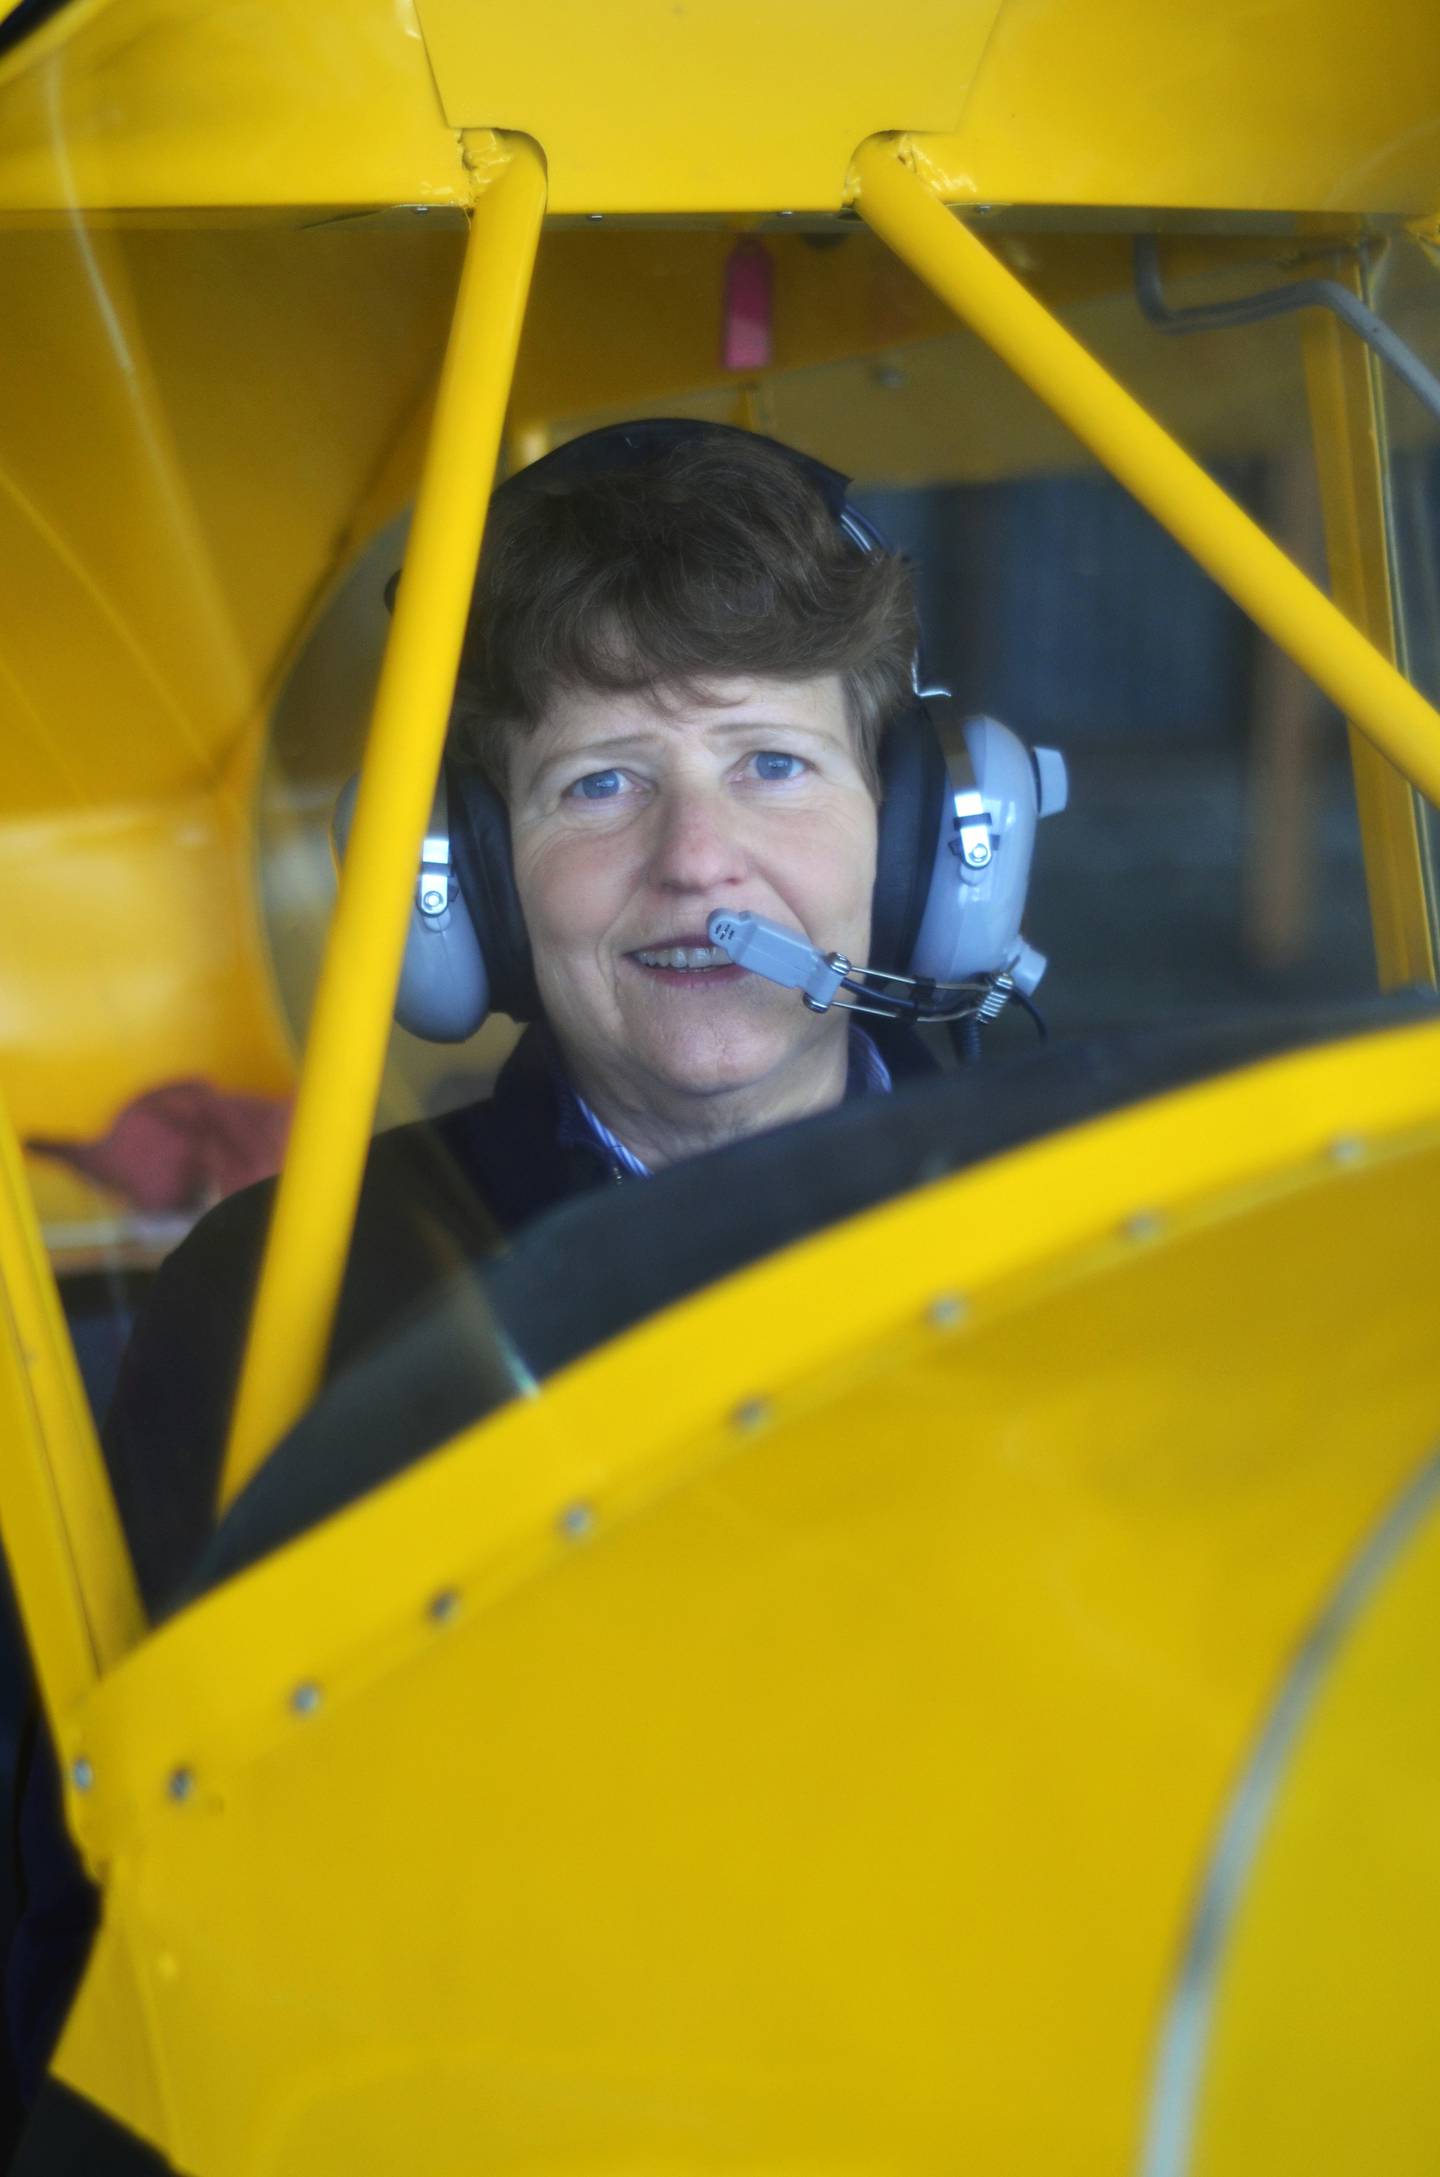 Eileen A. Bjorkman, author of The Fly Girls Revolt, writer, pilot, aeronautical engineer, and retired Air Force colonel.